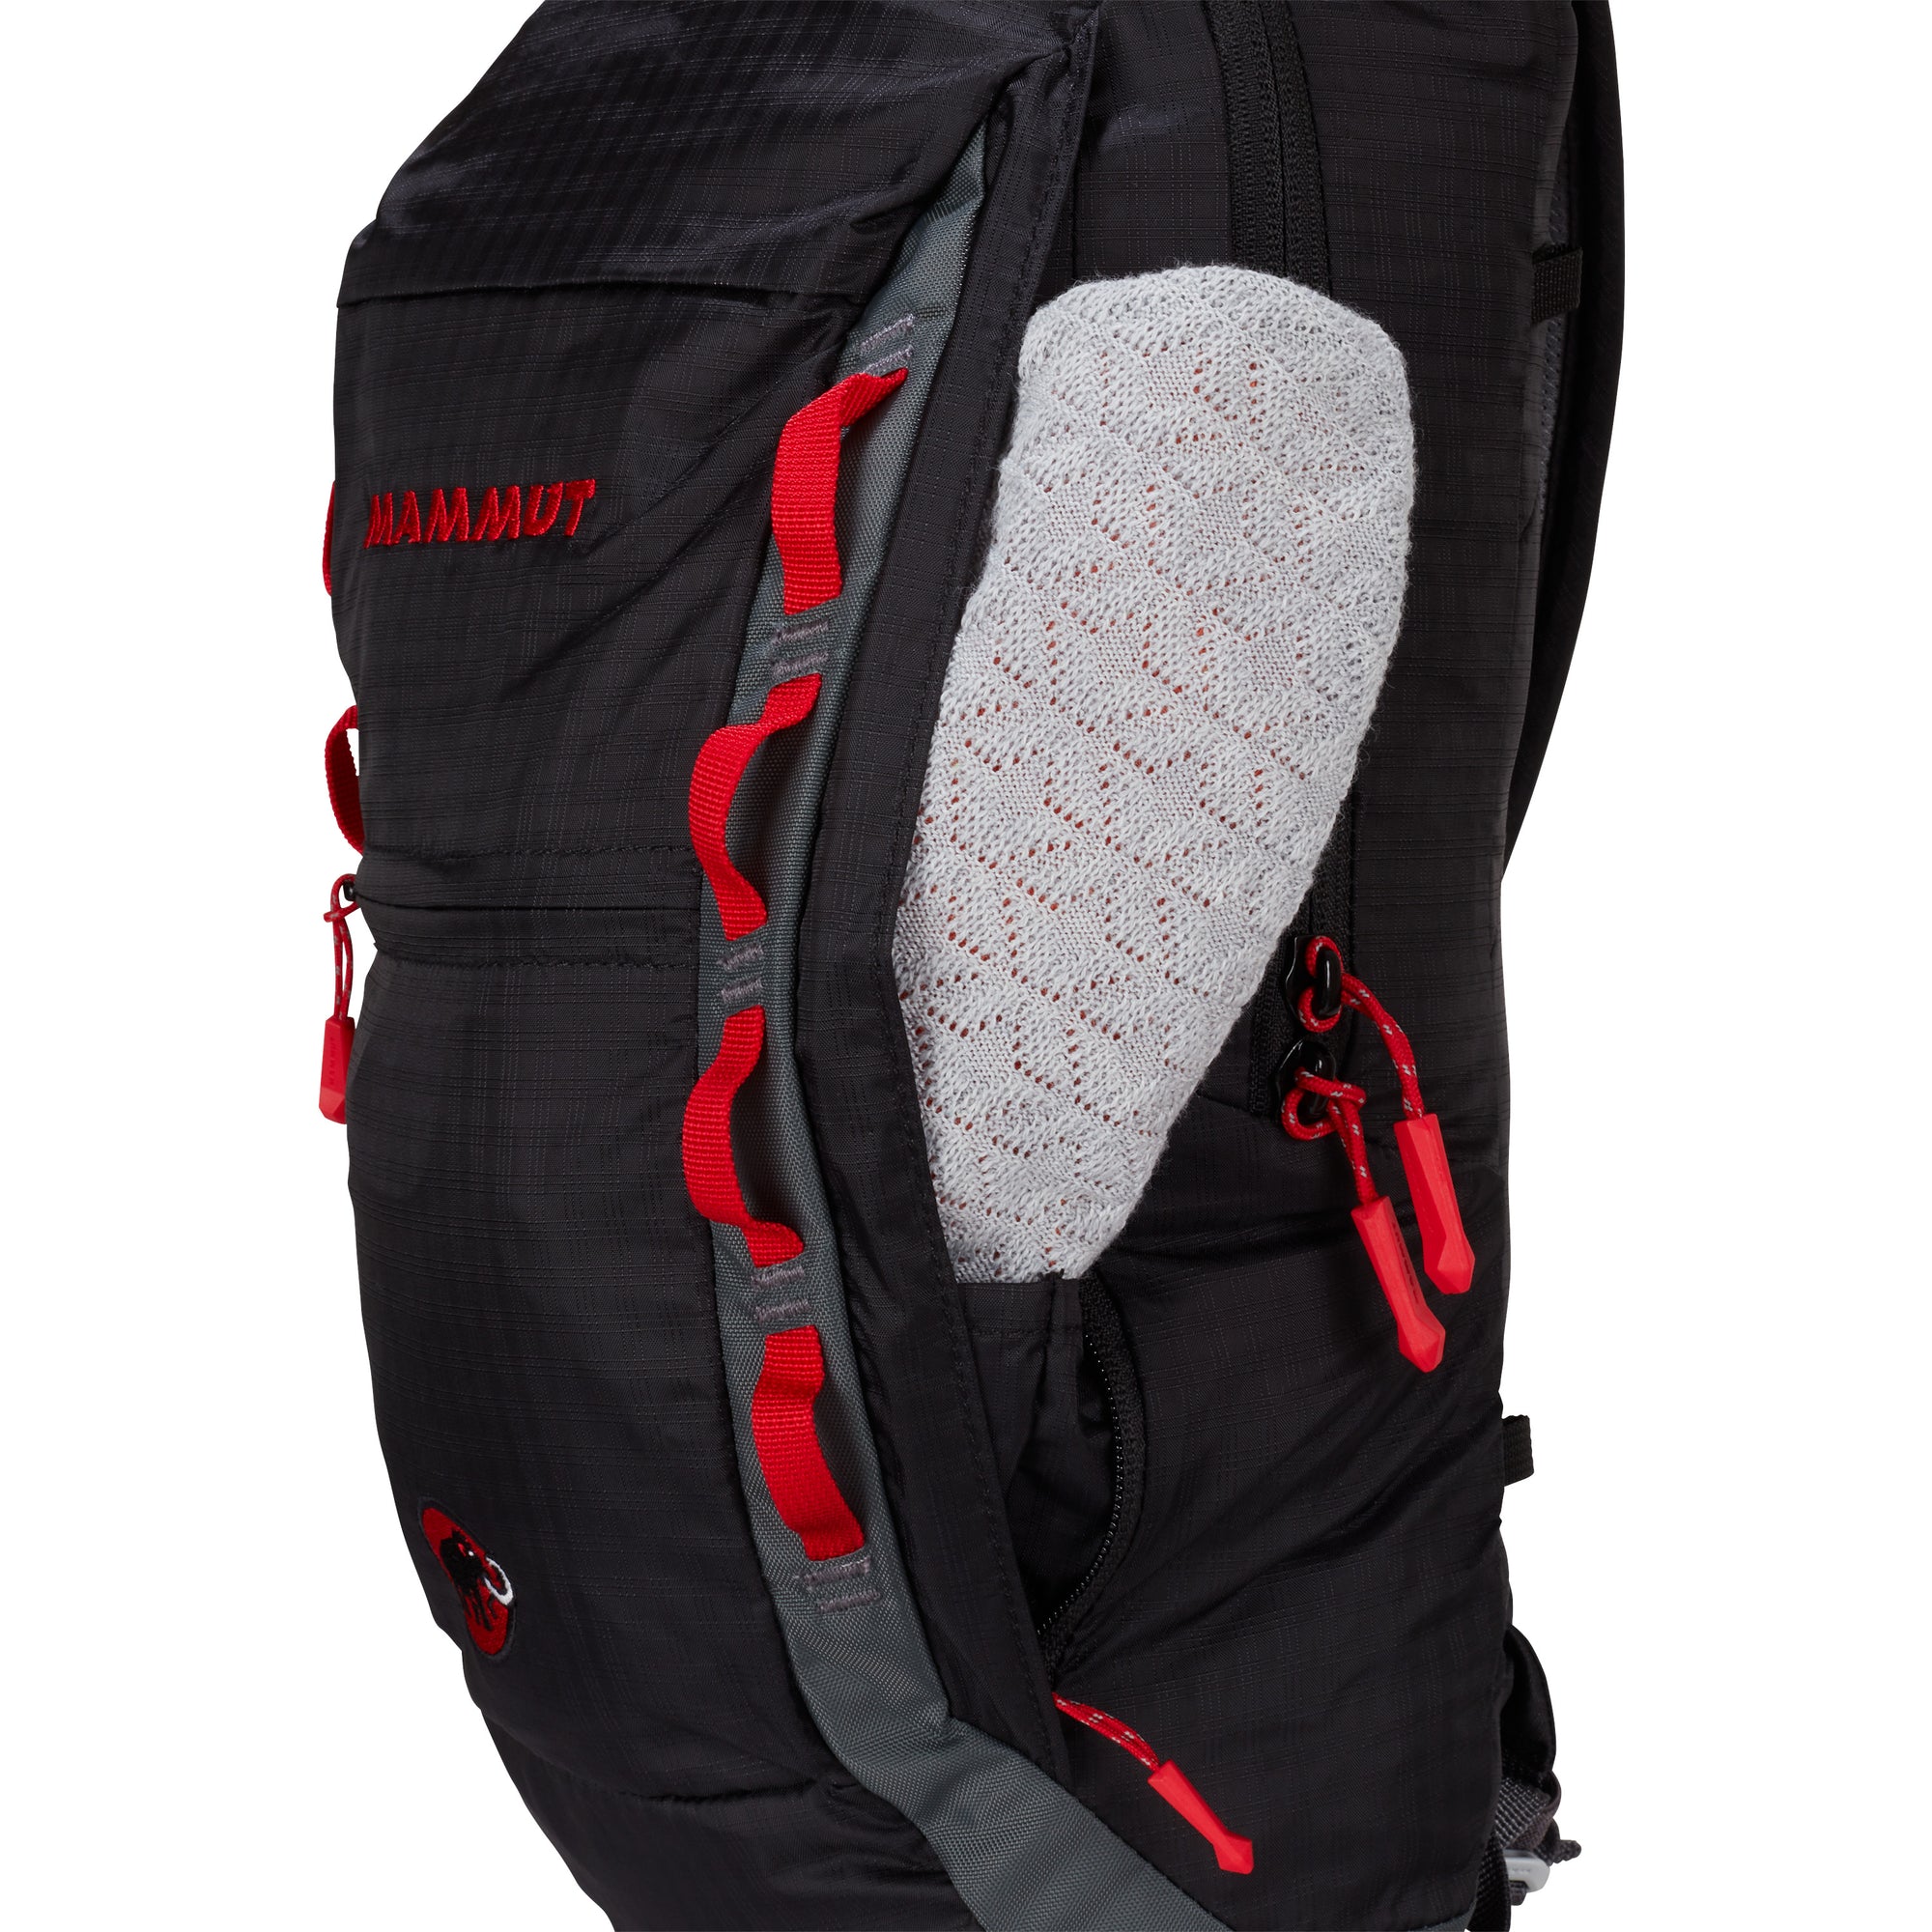 the mammut neon light pack in black showing side pocket